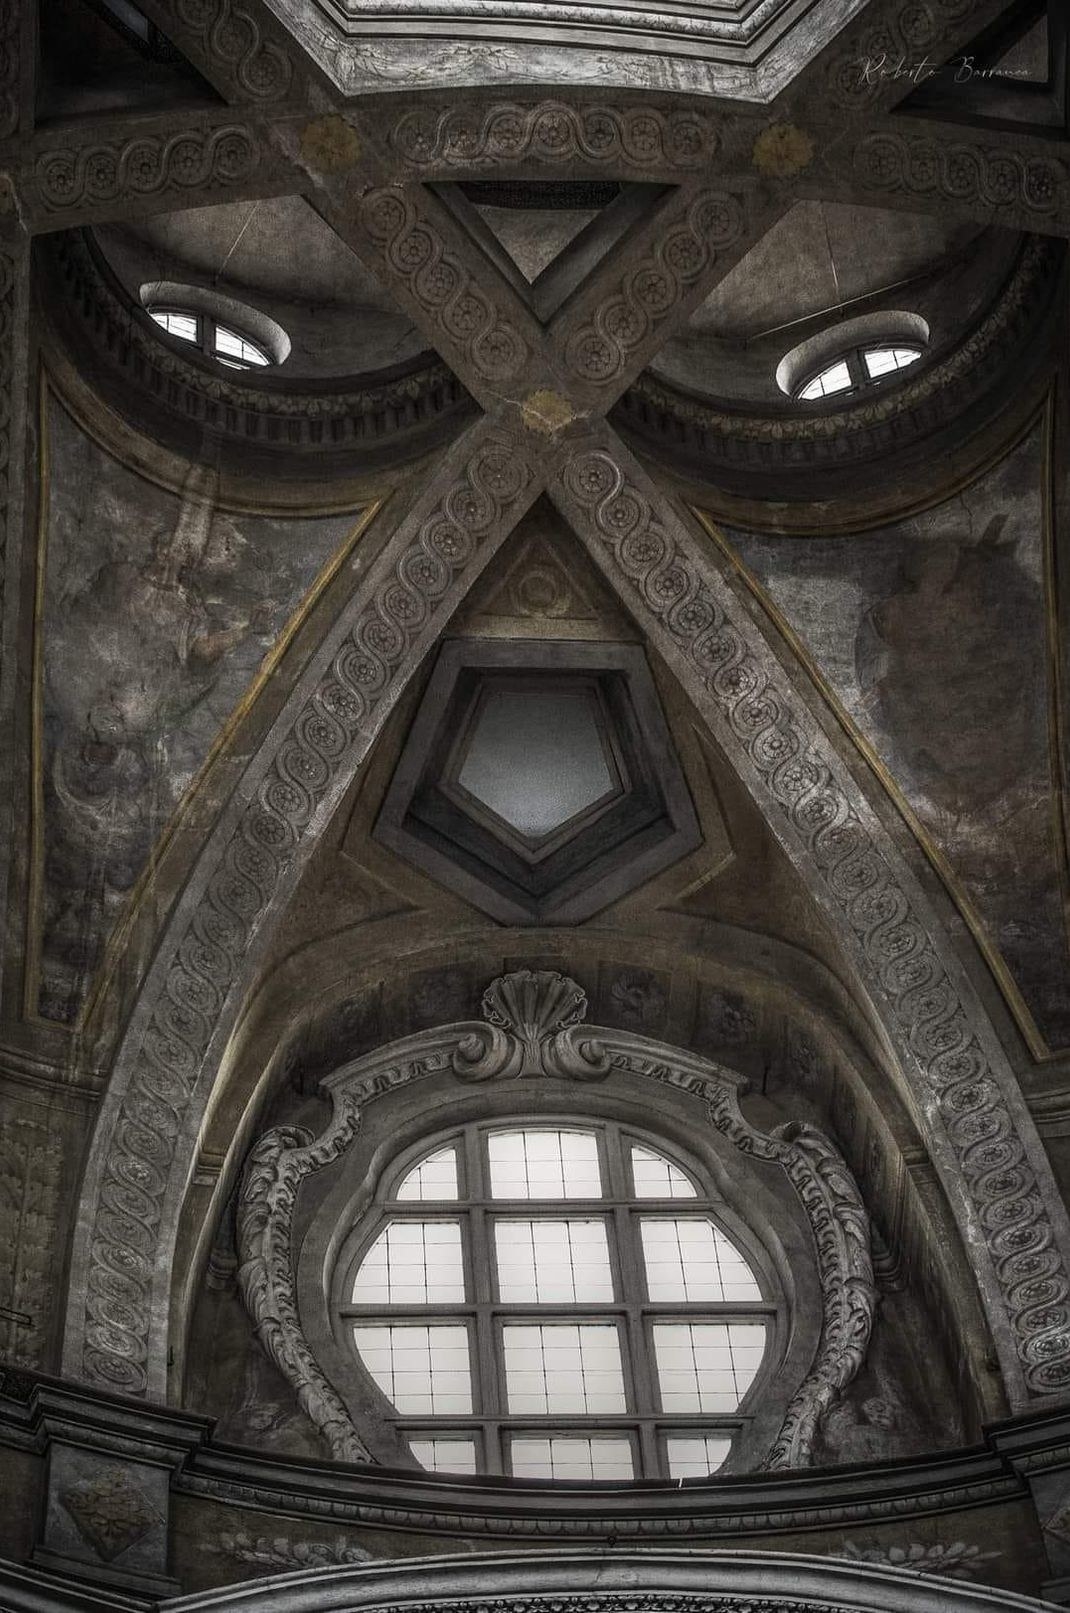 The inside of the church ceiling with arches and windows shaped like an angry face